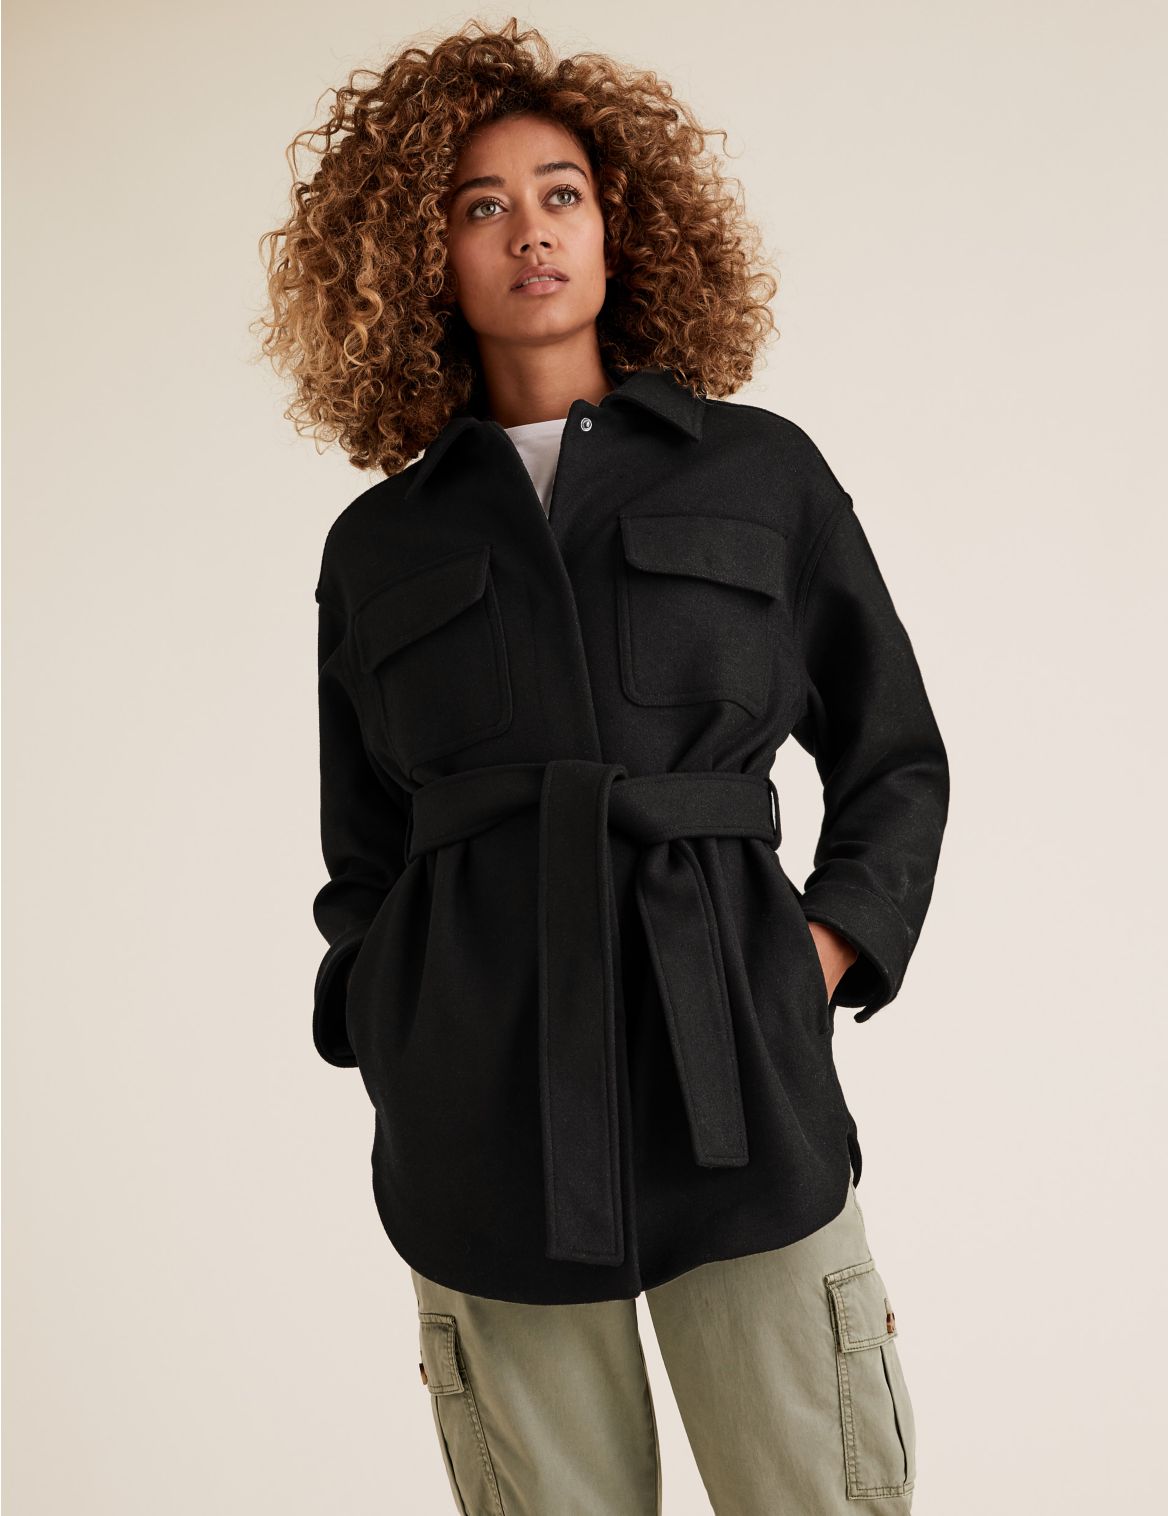 Belted Utility Jacket with Wool black